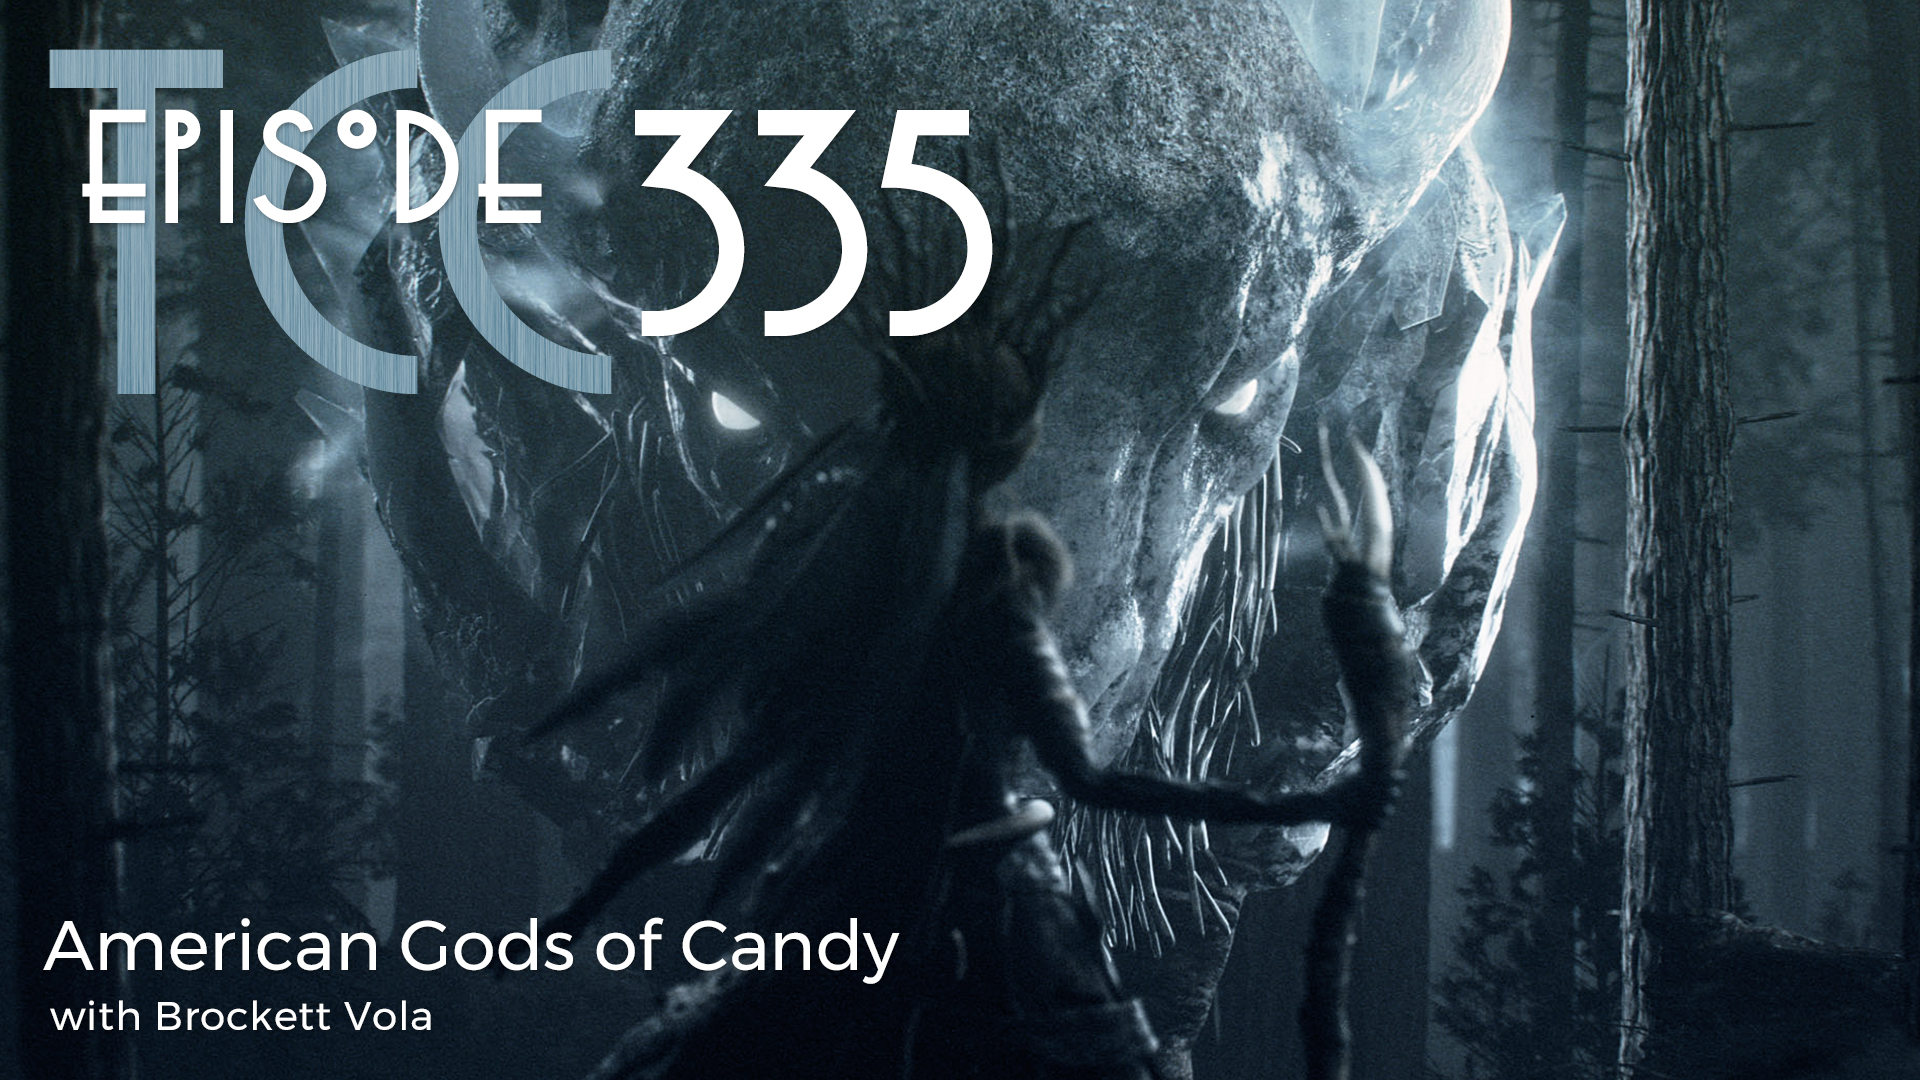 The Citadel Cafe 335: American Gods of Candy